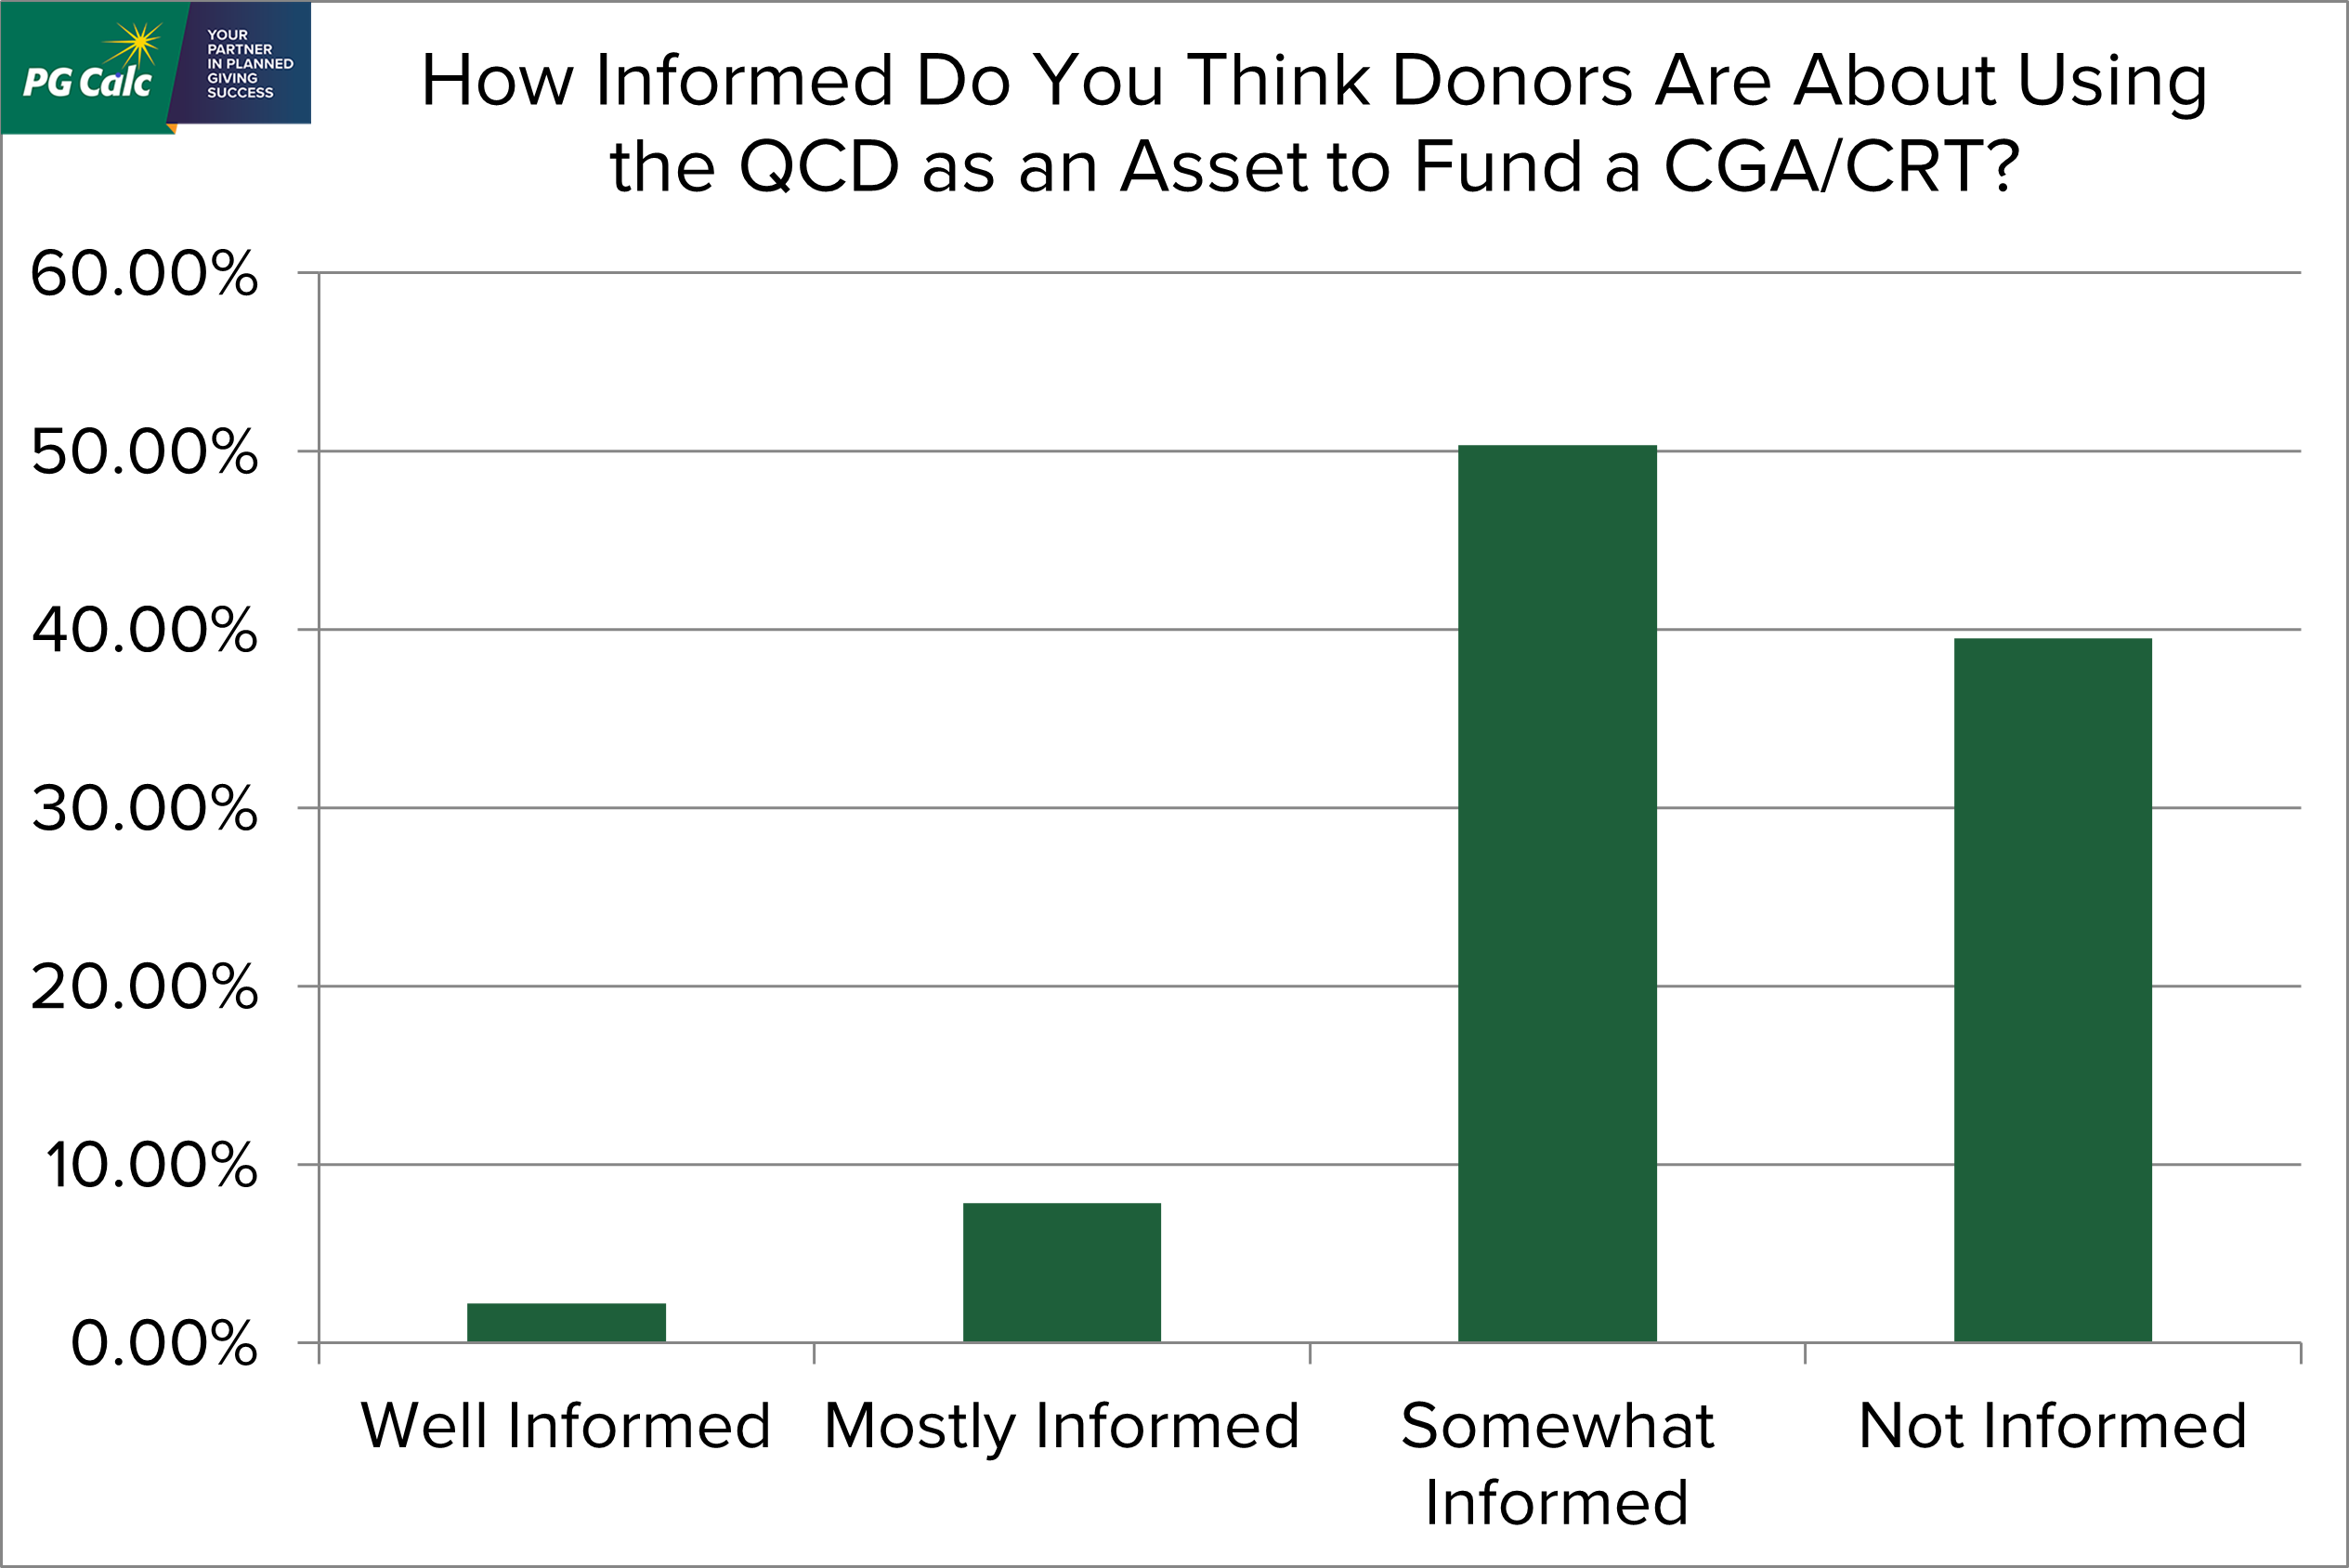 Graph: How informed do you think donors are about using the QCD as an asset to fund a CGA/CRT? Well informed = 2.3%, Mostly informed = 7.9%, Somewhat informed = 50.3%, Not informed = 39.6%